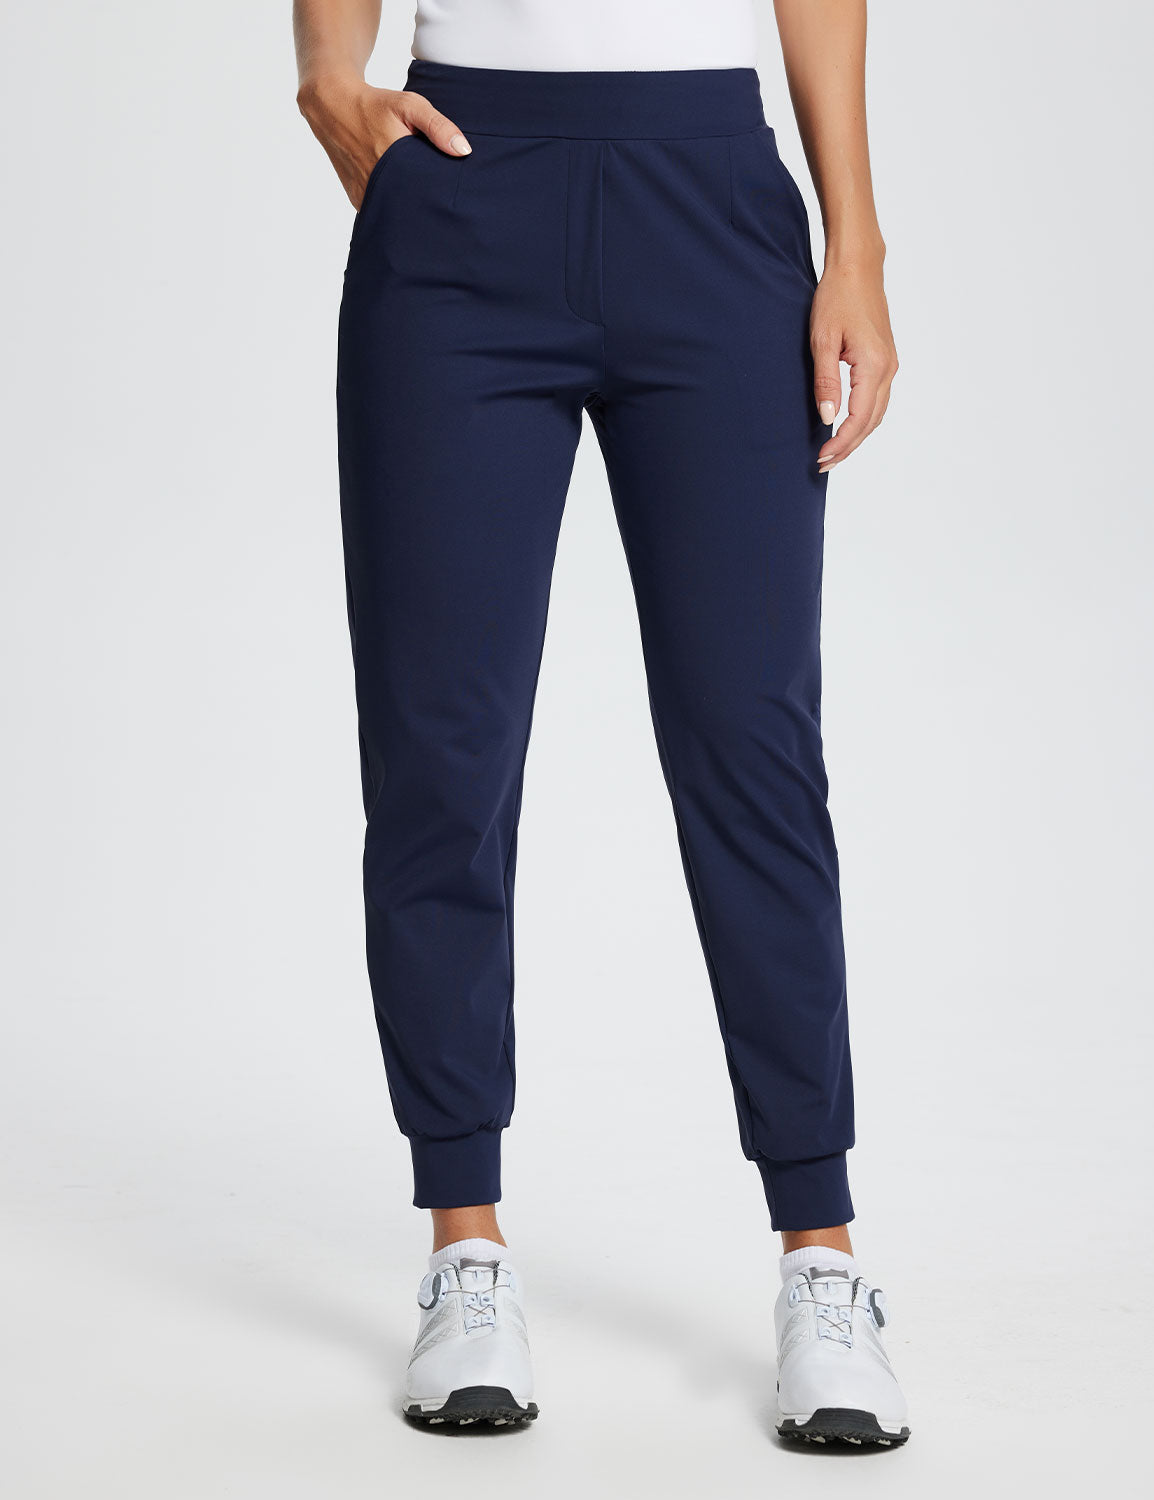 Baleaf Women's Flyleaf Quick-Dry Tapered Sun Protection Joggers